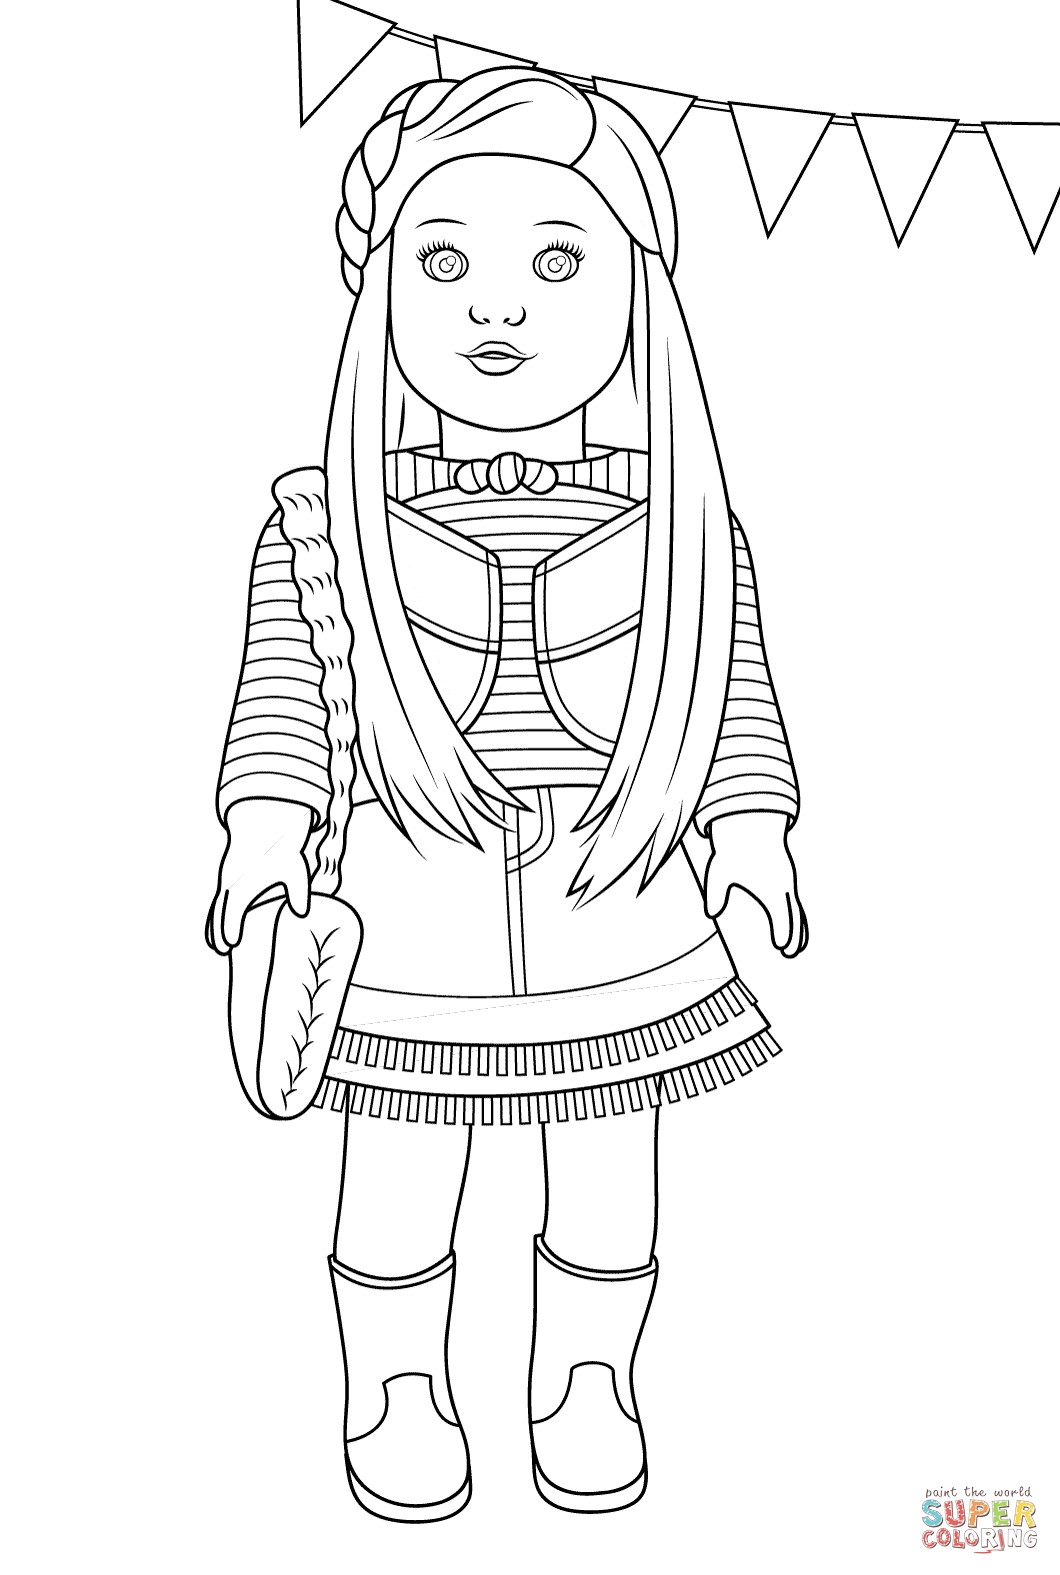 Coloring Sheets For Girls Size Big
 Free Printable American Girl Doll Coloring Pages Free